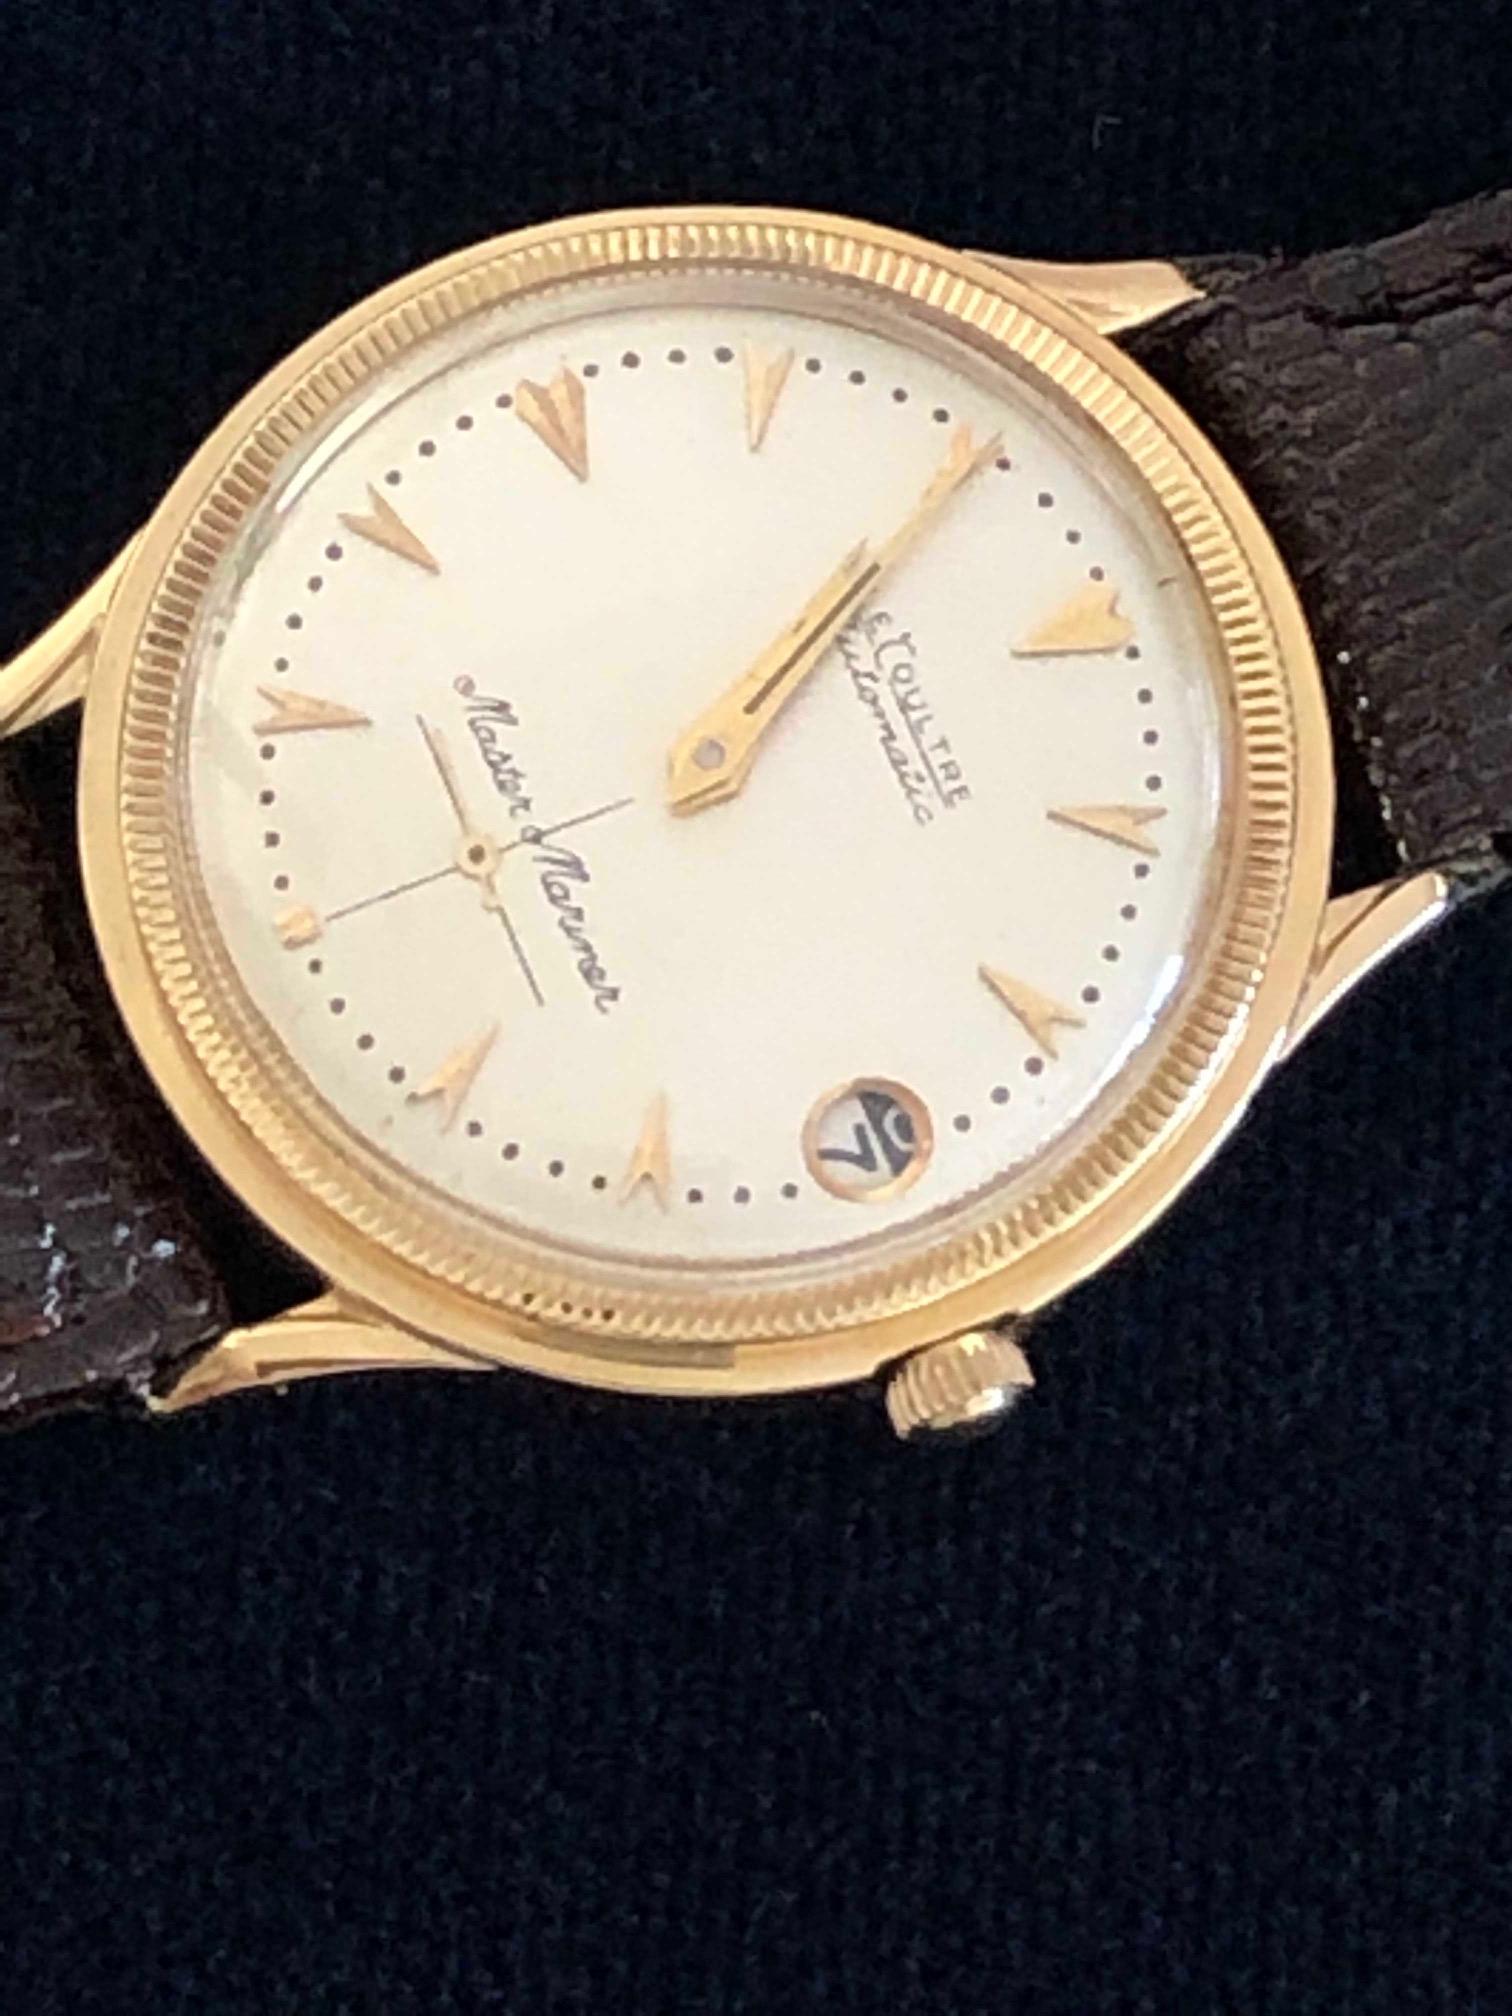 An unusual find, a Lecoultre automatic men’s 14-karat gold watch with case and papers. Measures 34.5